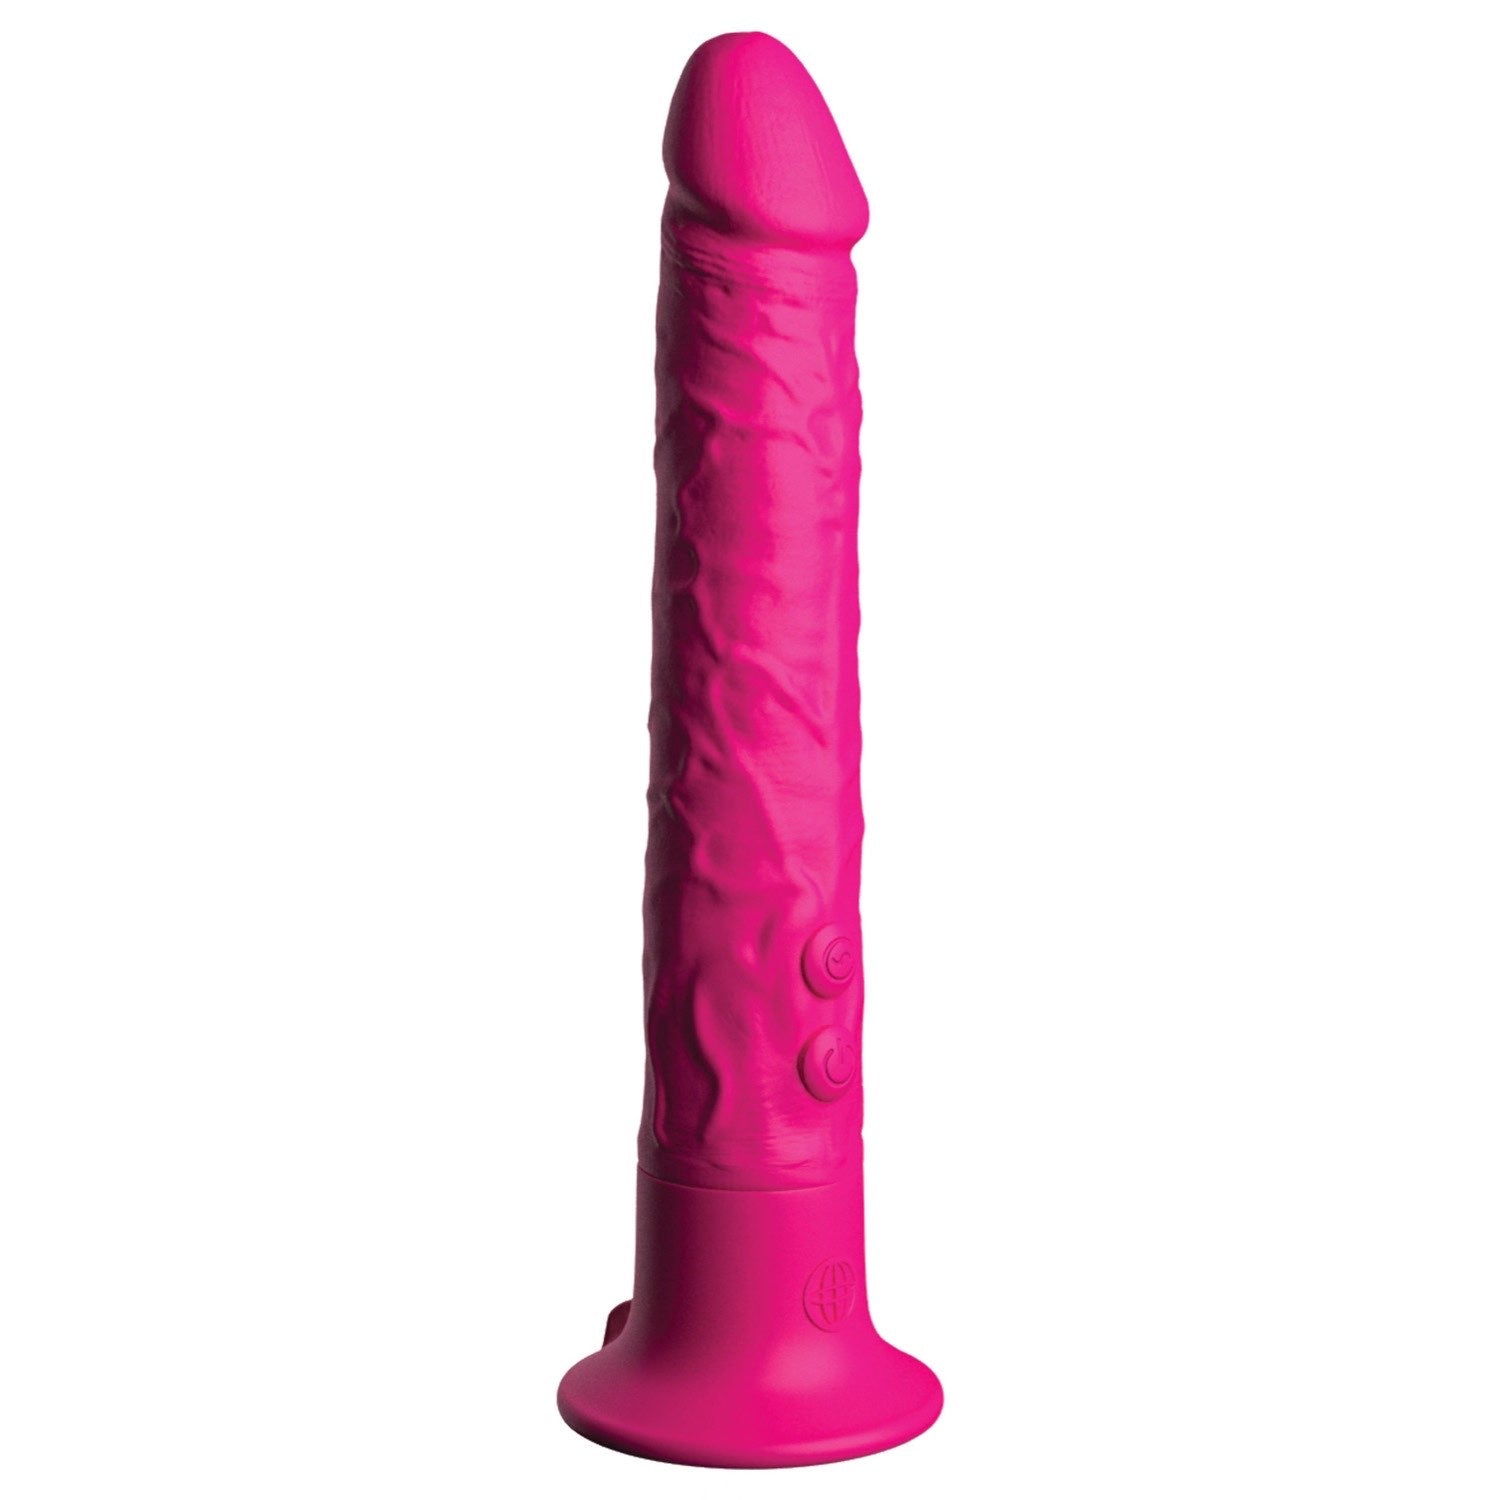 Classix Wall Banger 2.0 - Pink 19.1 cm Vibrator by Pipedream